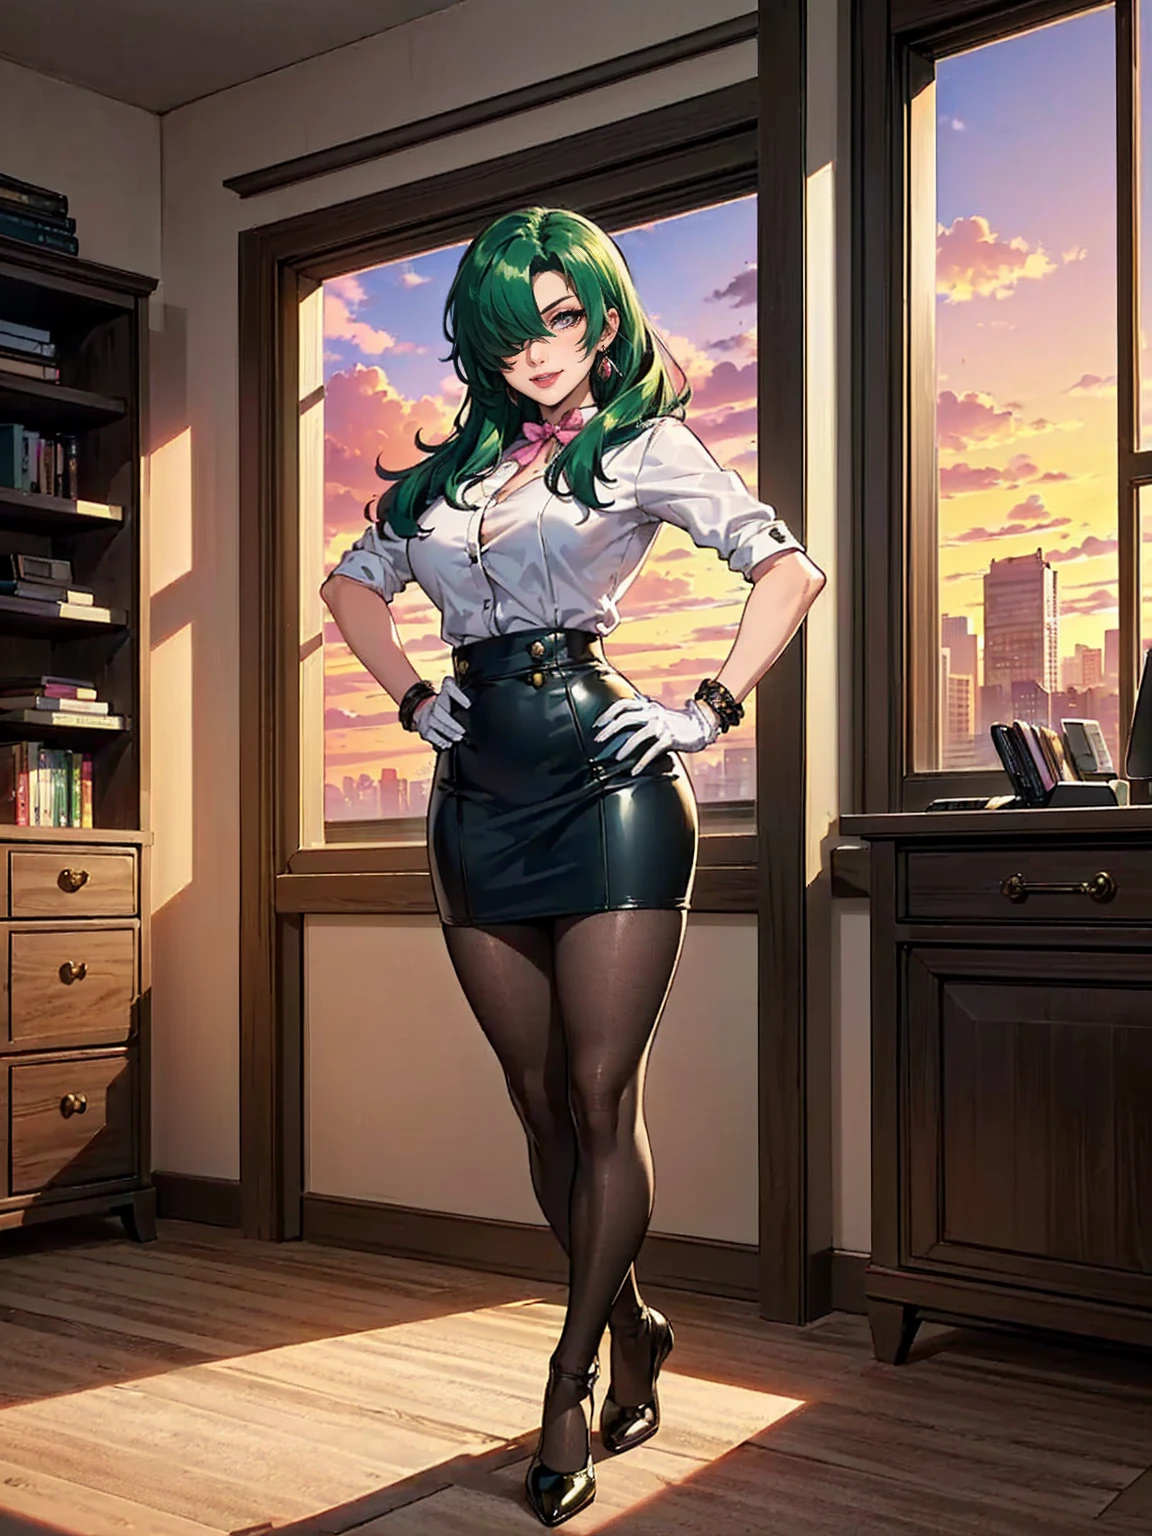 ((1girl, solo ,alone, long hair, green hair, yellow eyes, hair covering one eye, long gloves, white gloves, woman, (one hand on her hip, one hand behind her head) , dynamic pose, muscular female, gold bracelets, ruby earrings)), , ((solo, (1woman, pink lipstick), Extremely detailed, ambient soft lighting, 4k, perfect eyes, a perfect face, perfect lighting, a 1girl)), ((1girl, solo, alone, ai hayasaka, bangs, blue eyes, blonde hair, hair ornament, sidelocks, side ponytail, scrunchie, hair scrunchie, blue scrunchie)), ((solo, (1woman, pink lipstick), Extremely detailed, ambient soft lighting, 4k, perfect eyes, a perfect face, perfect lighting, a 1girl)), austere, ((shy smile, Officelady, Black suit, Black tight skirt, White blouse, Black tights, Office, lana, Beautiful woman, gazing at viewer, Looking here, hight resolution, top-quality, full body, animations, illustratio, office, penthouse, executive room, large window, landscape of a metropolis, sunset, clouds)), documents, books, table, shelves, pencil holder, computer